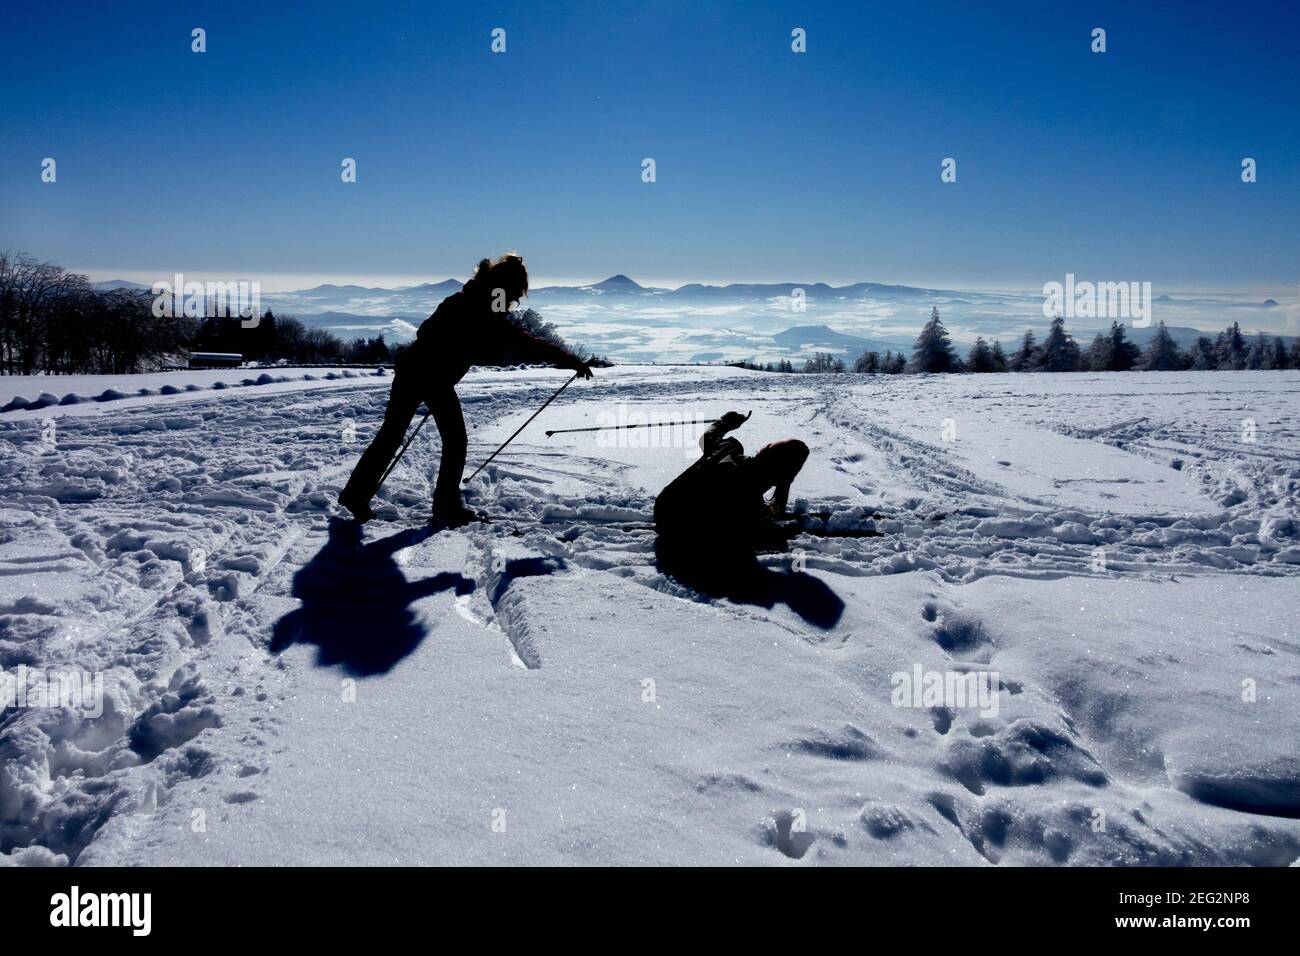 Silhouettes of a pair of skiers enjoying a nice sunny day in a snowy landscape Stock Photo